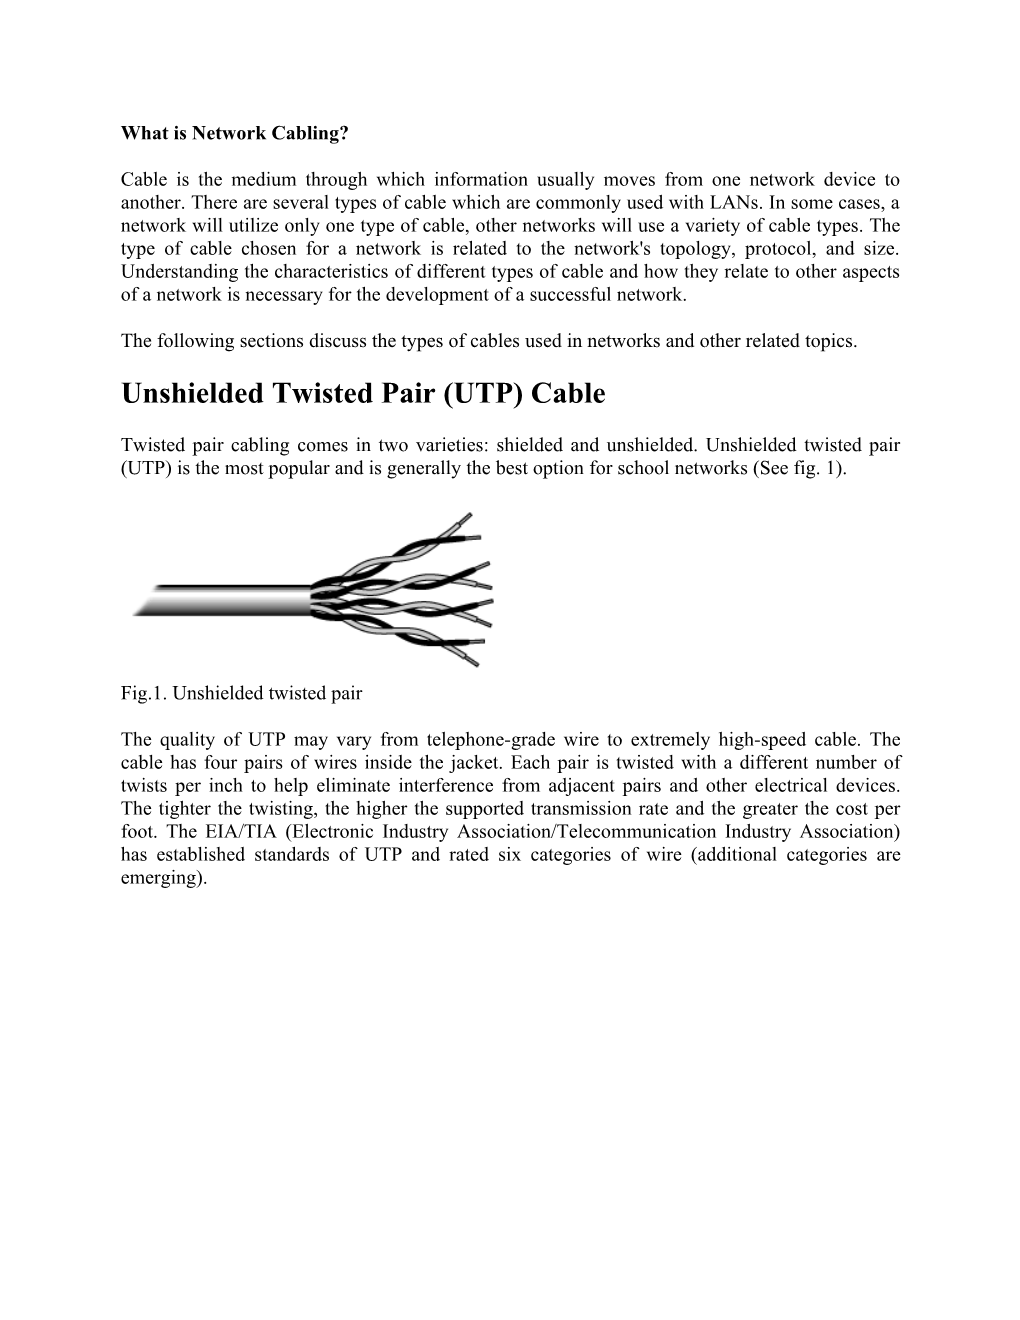 Unshielded Twisted Pair (UTP) Cable